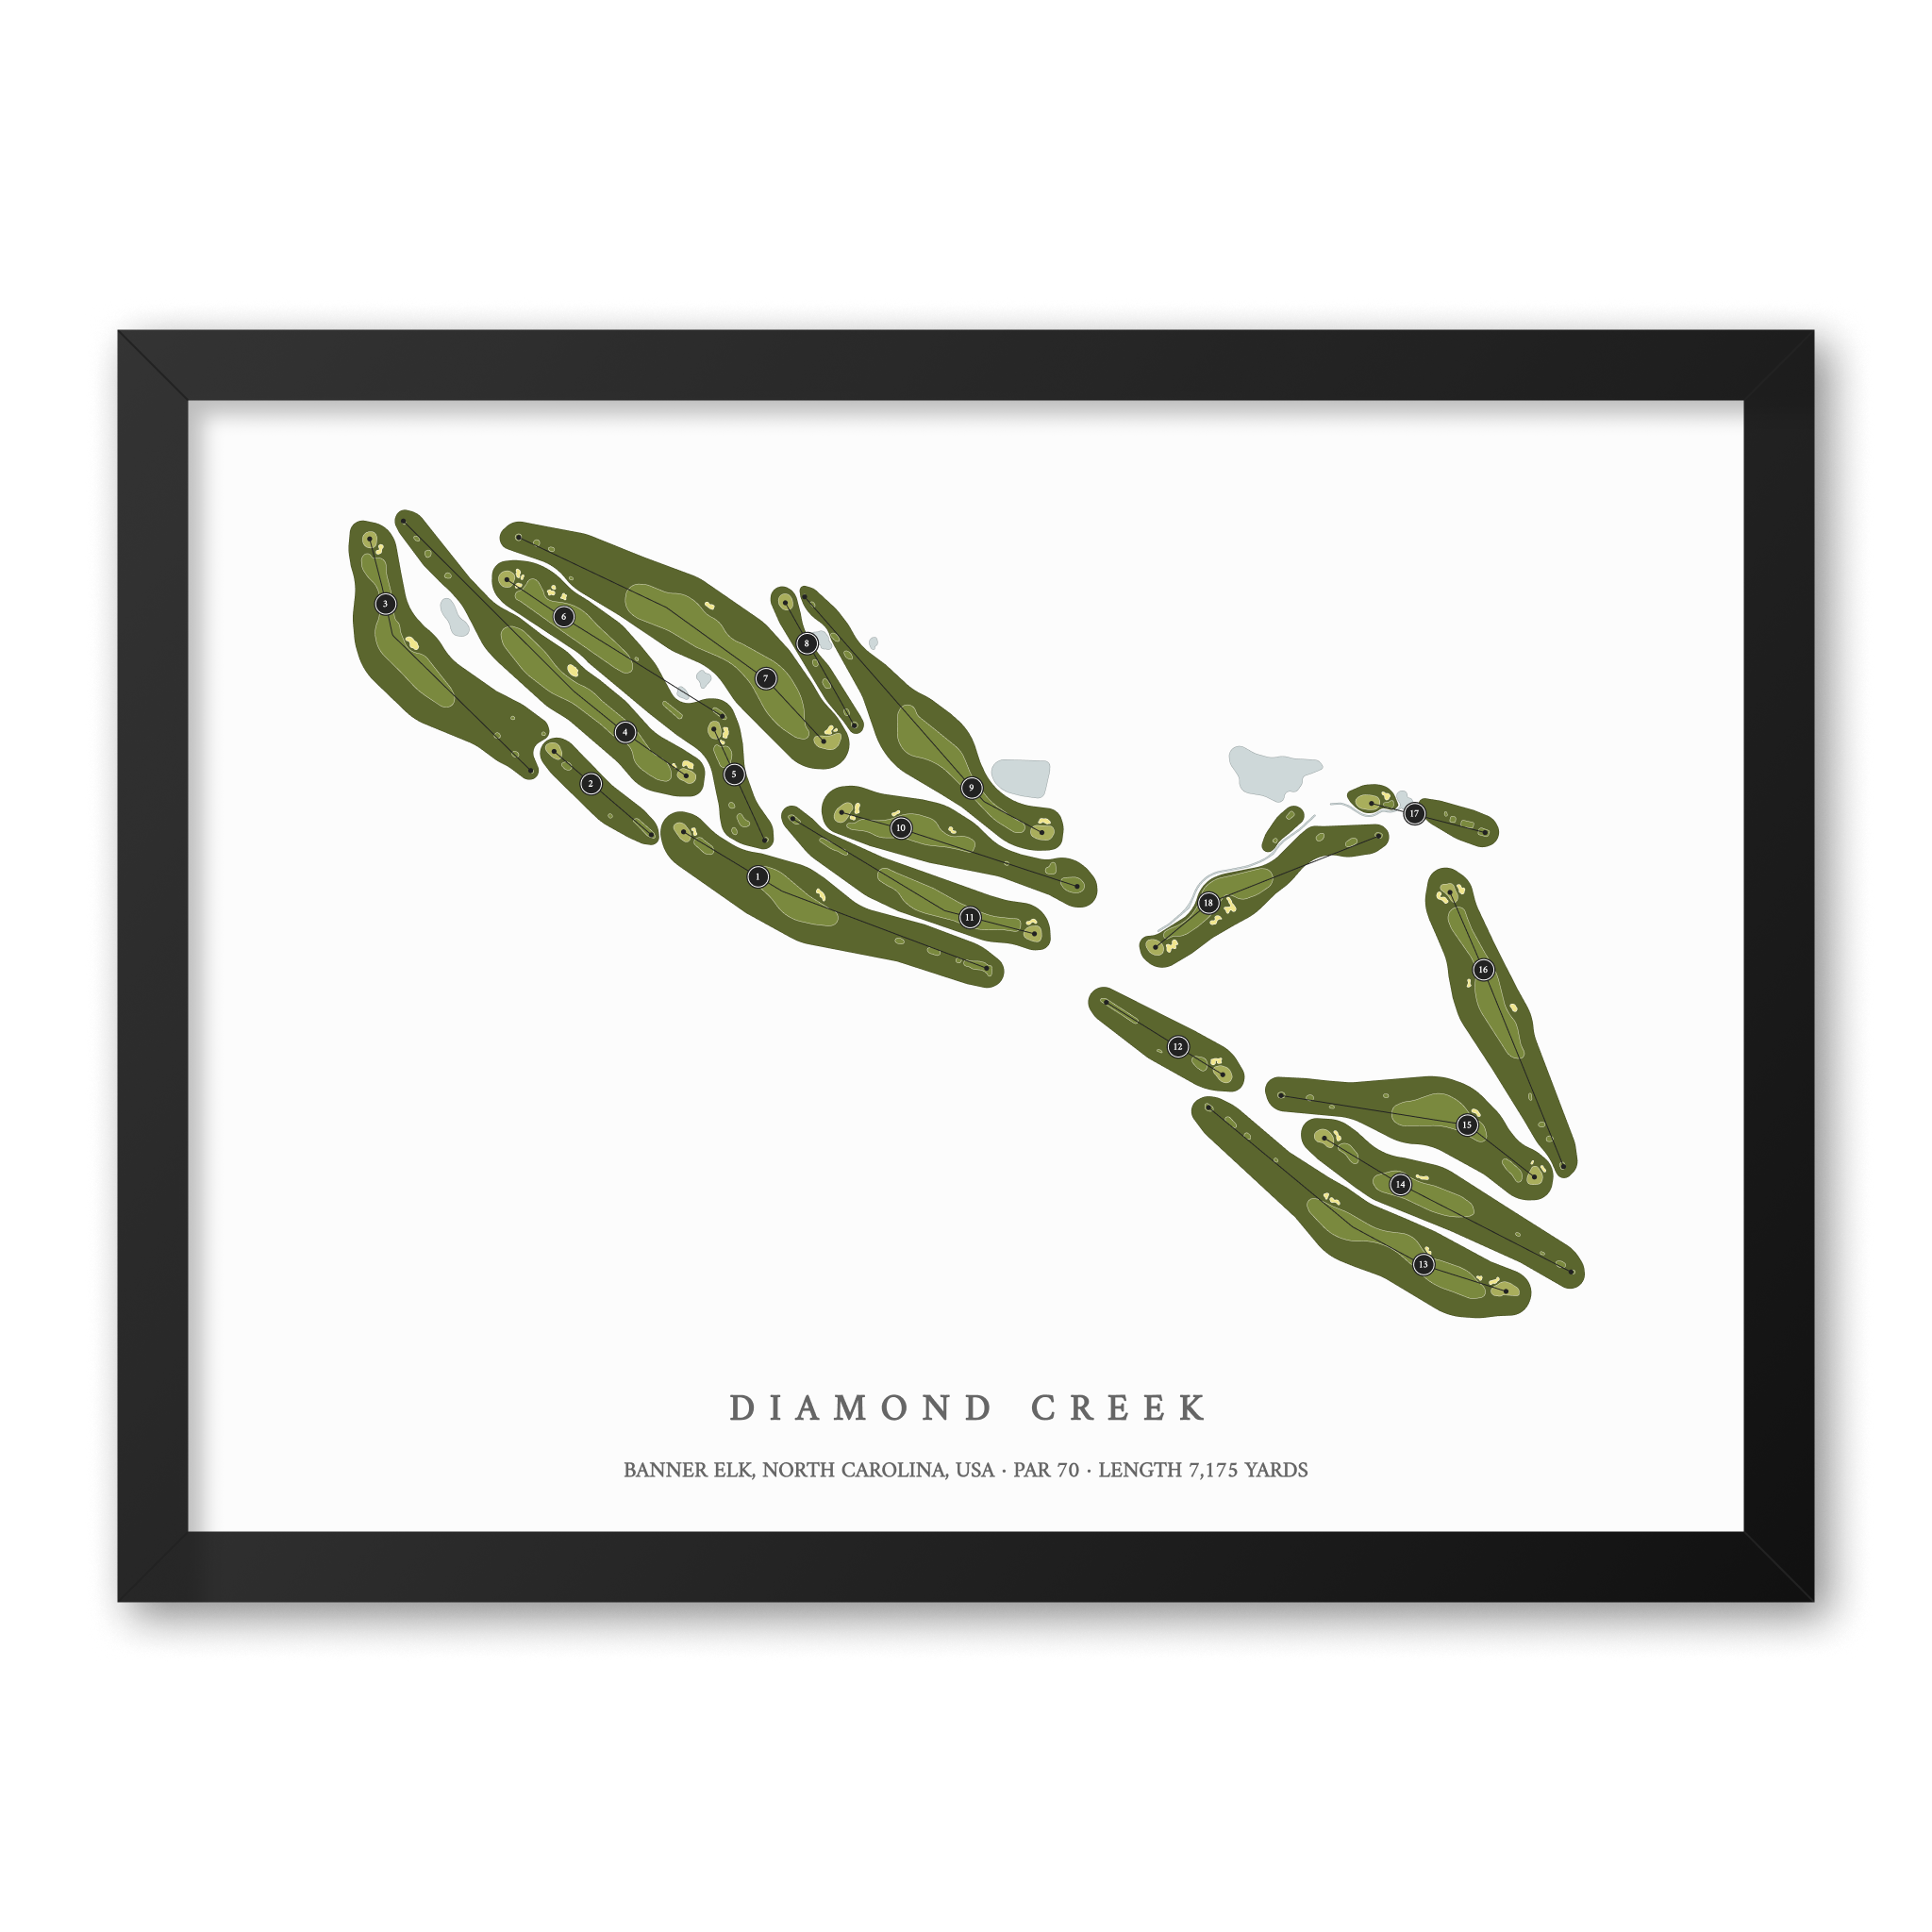 Diamond Creek | Golf Course Map | Black Frame With Hole Numbers #hole numbers_yes